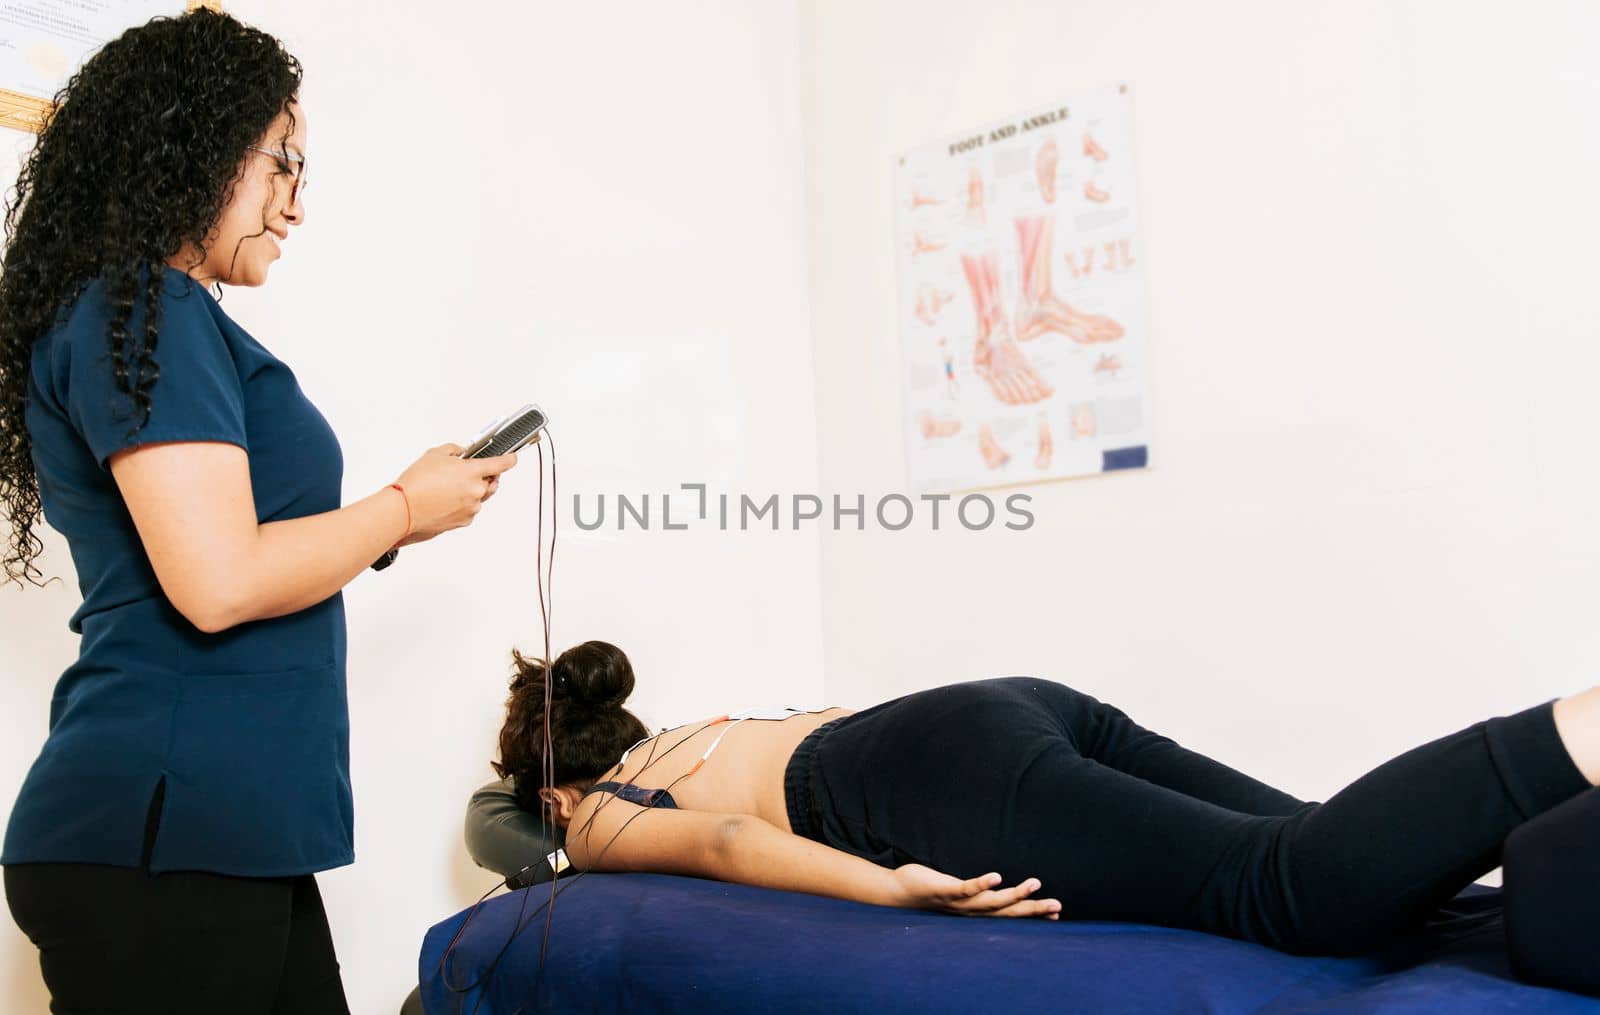 Professional physiotherapist electrostimulating a lying patient. Physiotherapist electrostimulating a patient. Lower back therapy with electrode pads. Electrode treatment to patient lying down